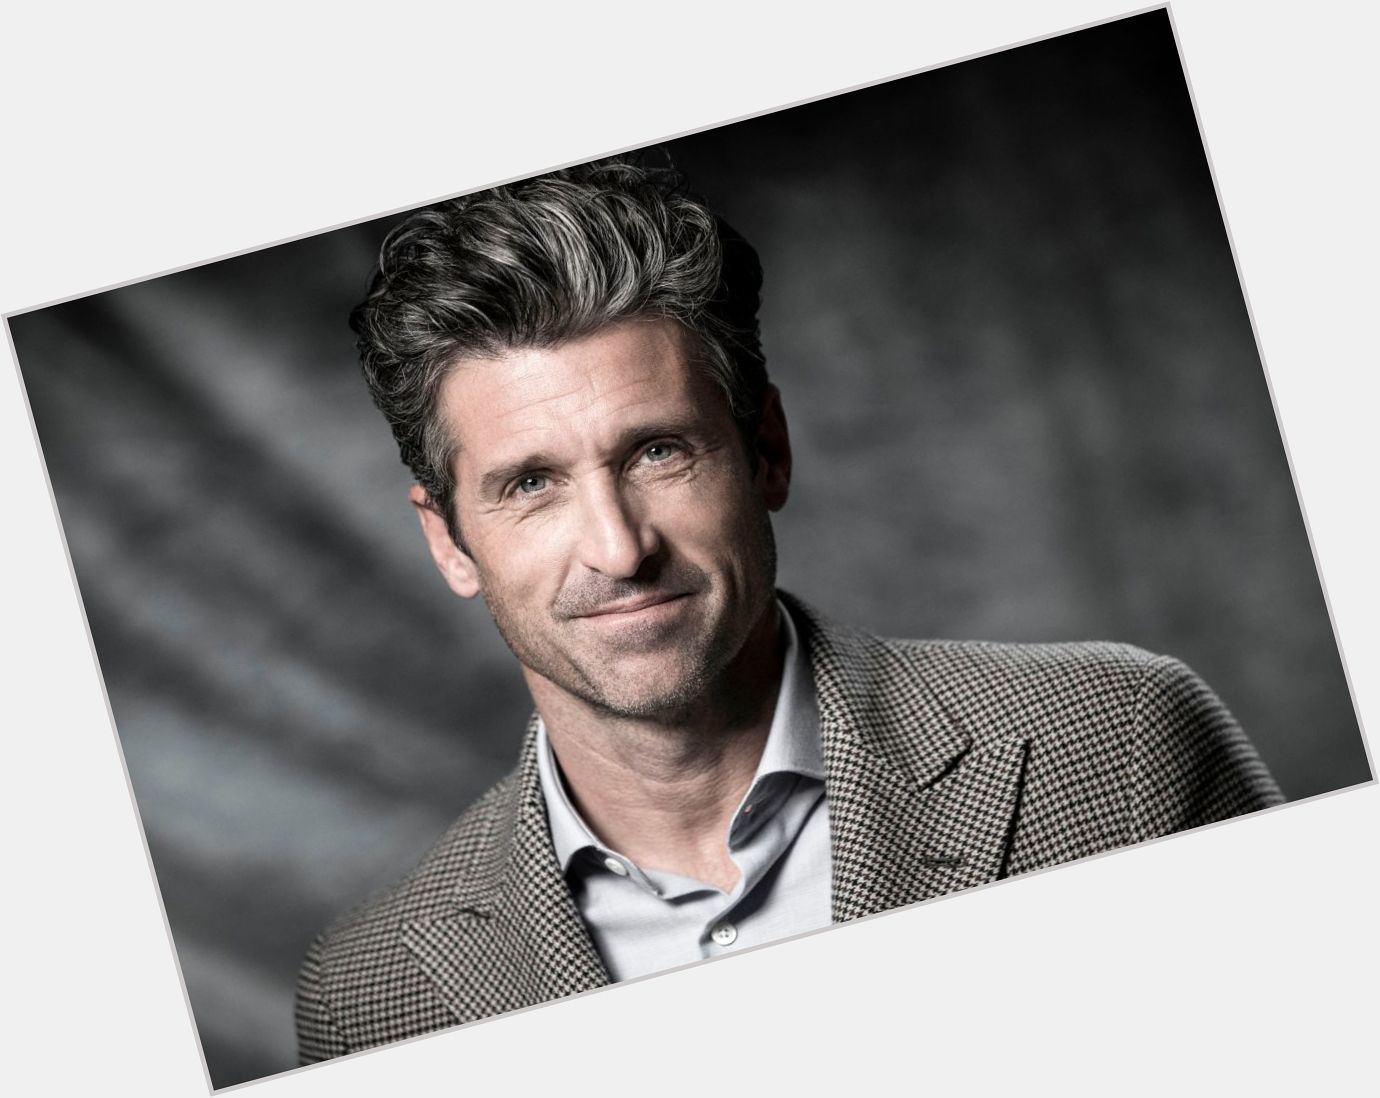 Happy 56th birthday Patrick Dempsey!

Are you excited to see him in the upcoming Disney film Disenchanted? 